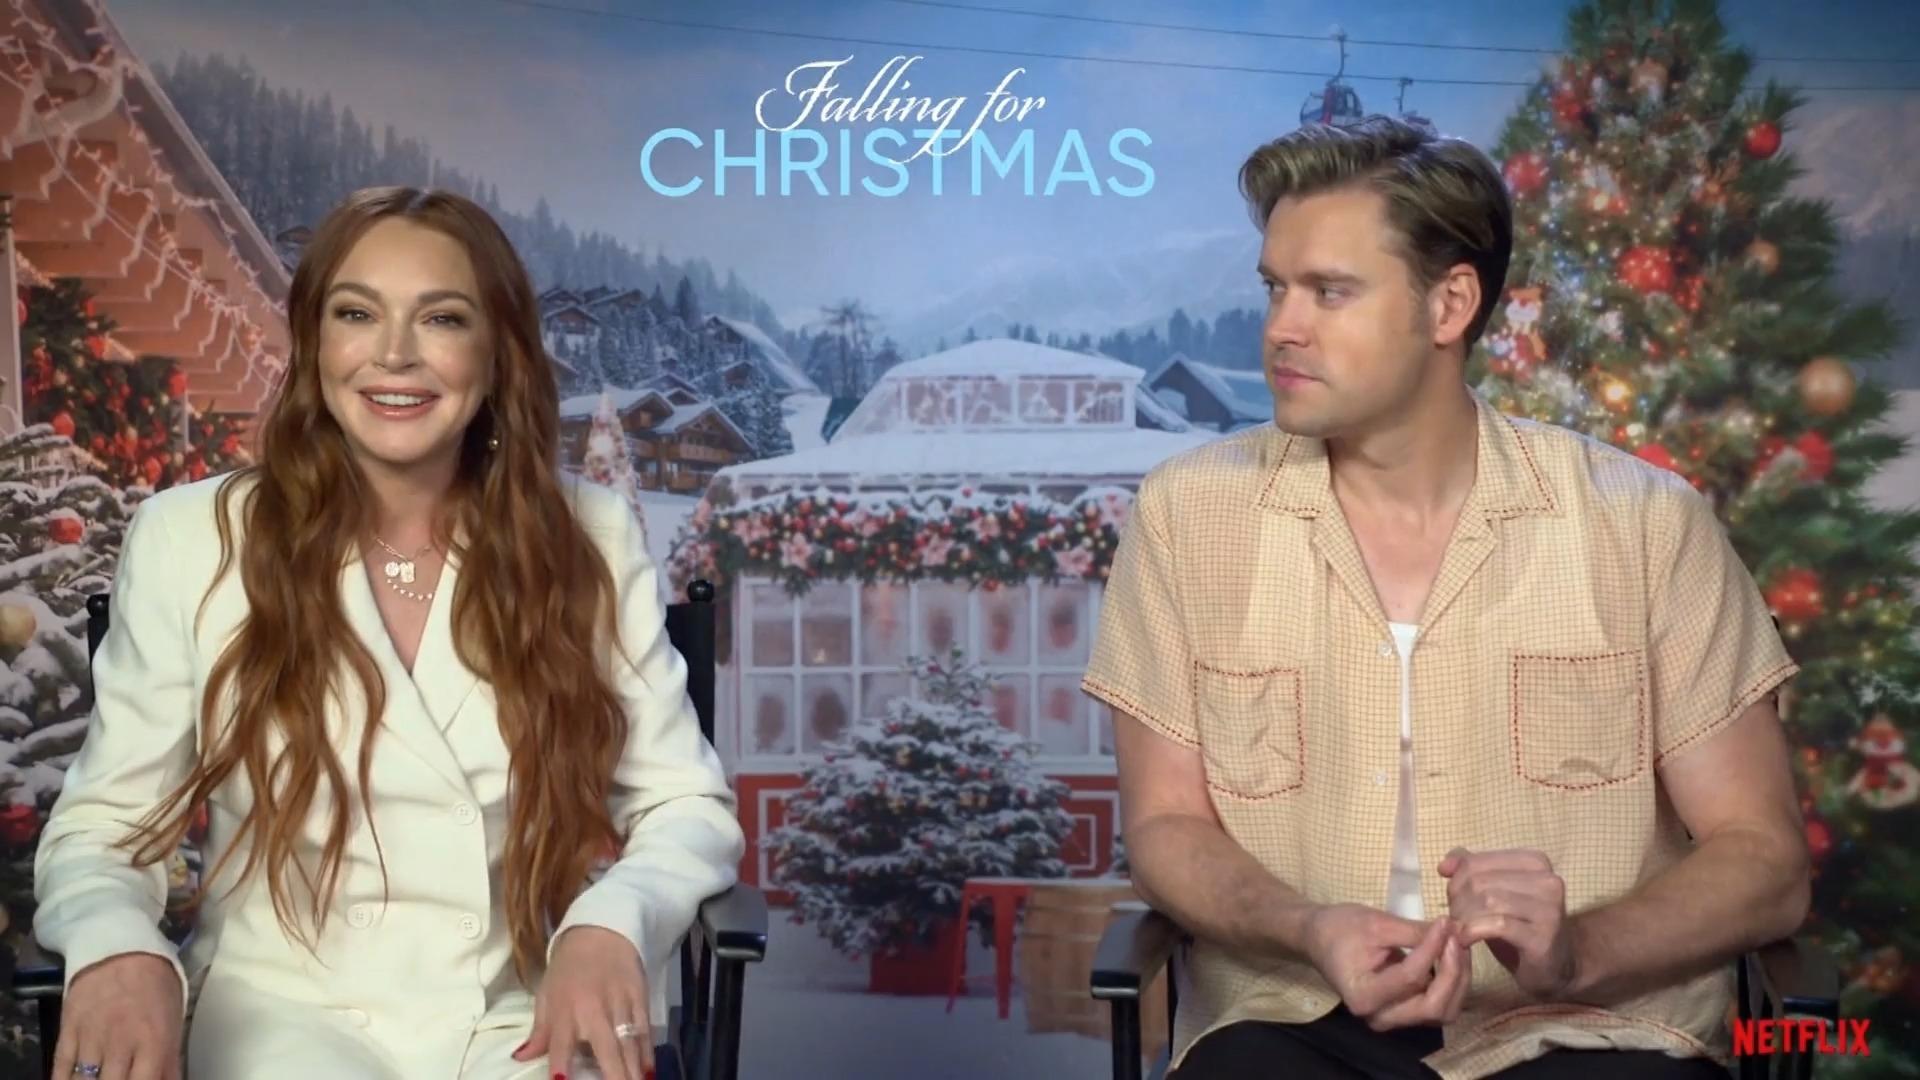 She is back!  Lindsay Lohan is back in front of the cameras "Now I'm really aware"